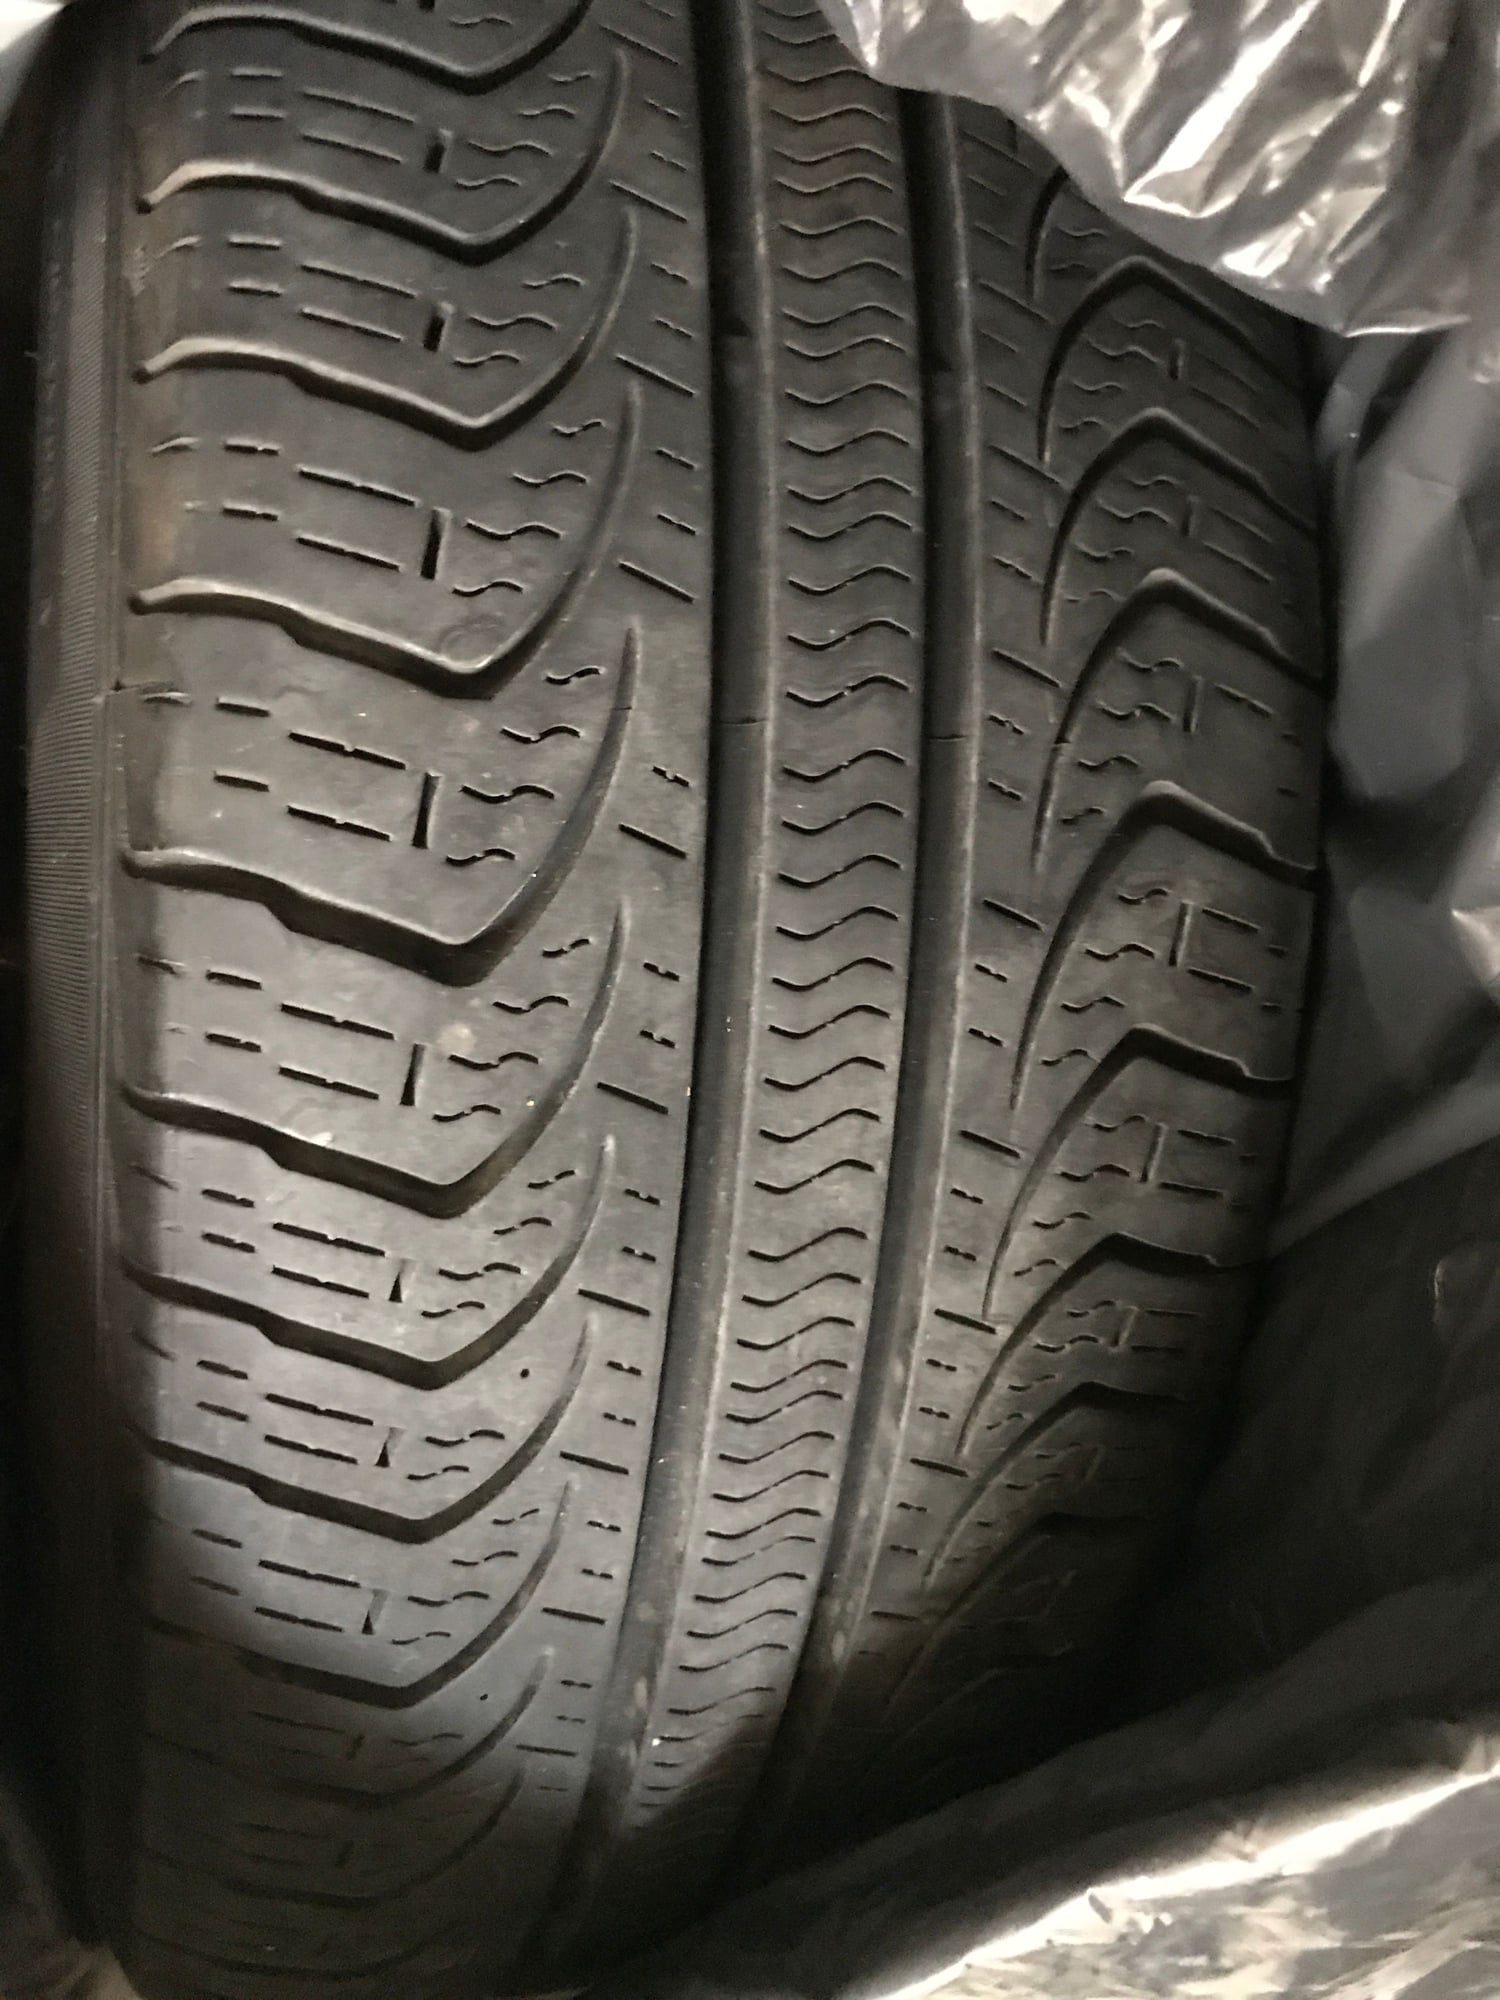 Wheels and Tires/Axles - E-Class Rims with Excellent Tires - Used - 2004 to 2006 Mercedes-Benz E500 - Toronto, ON M5A 1T, Canada